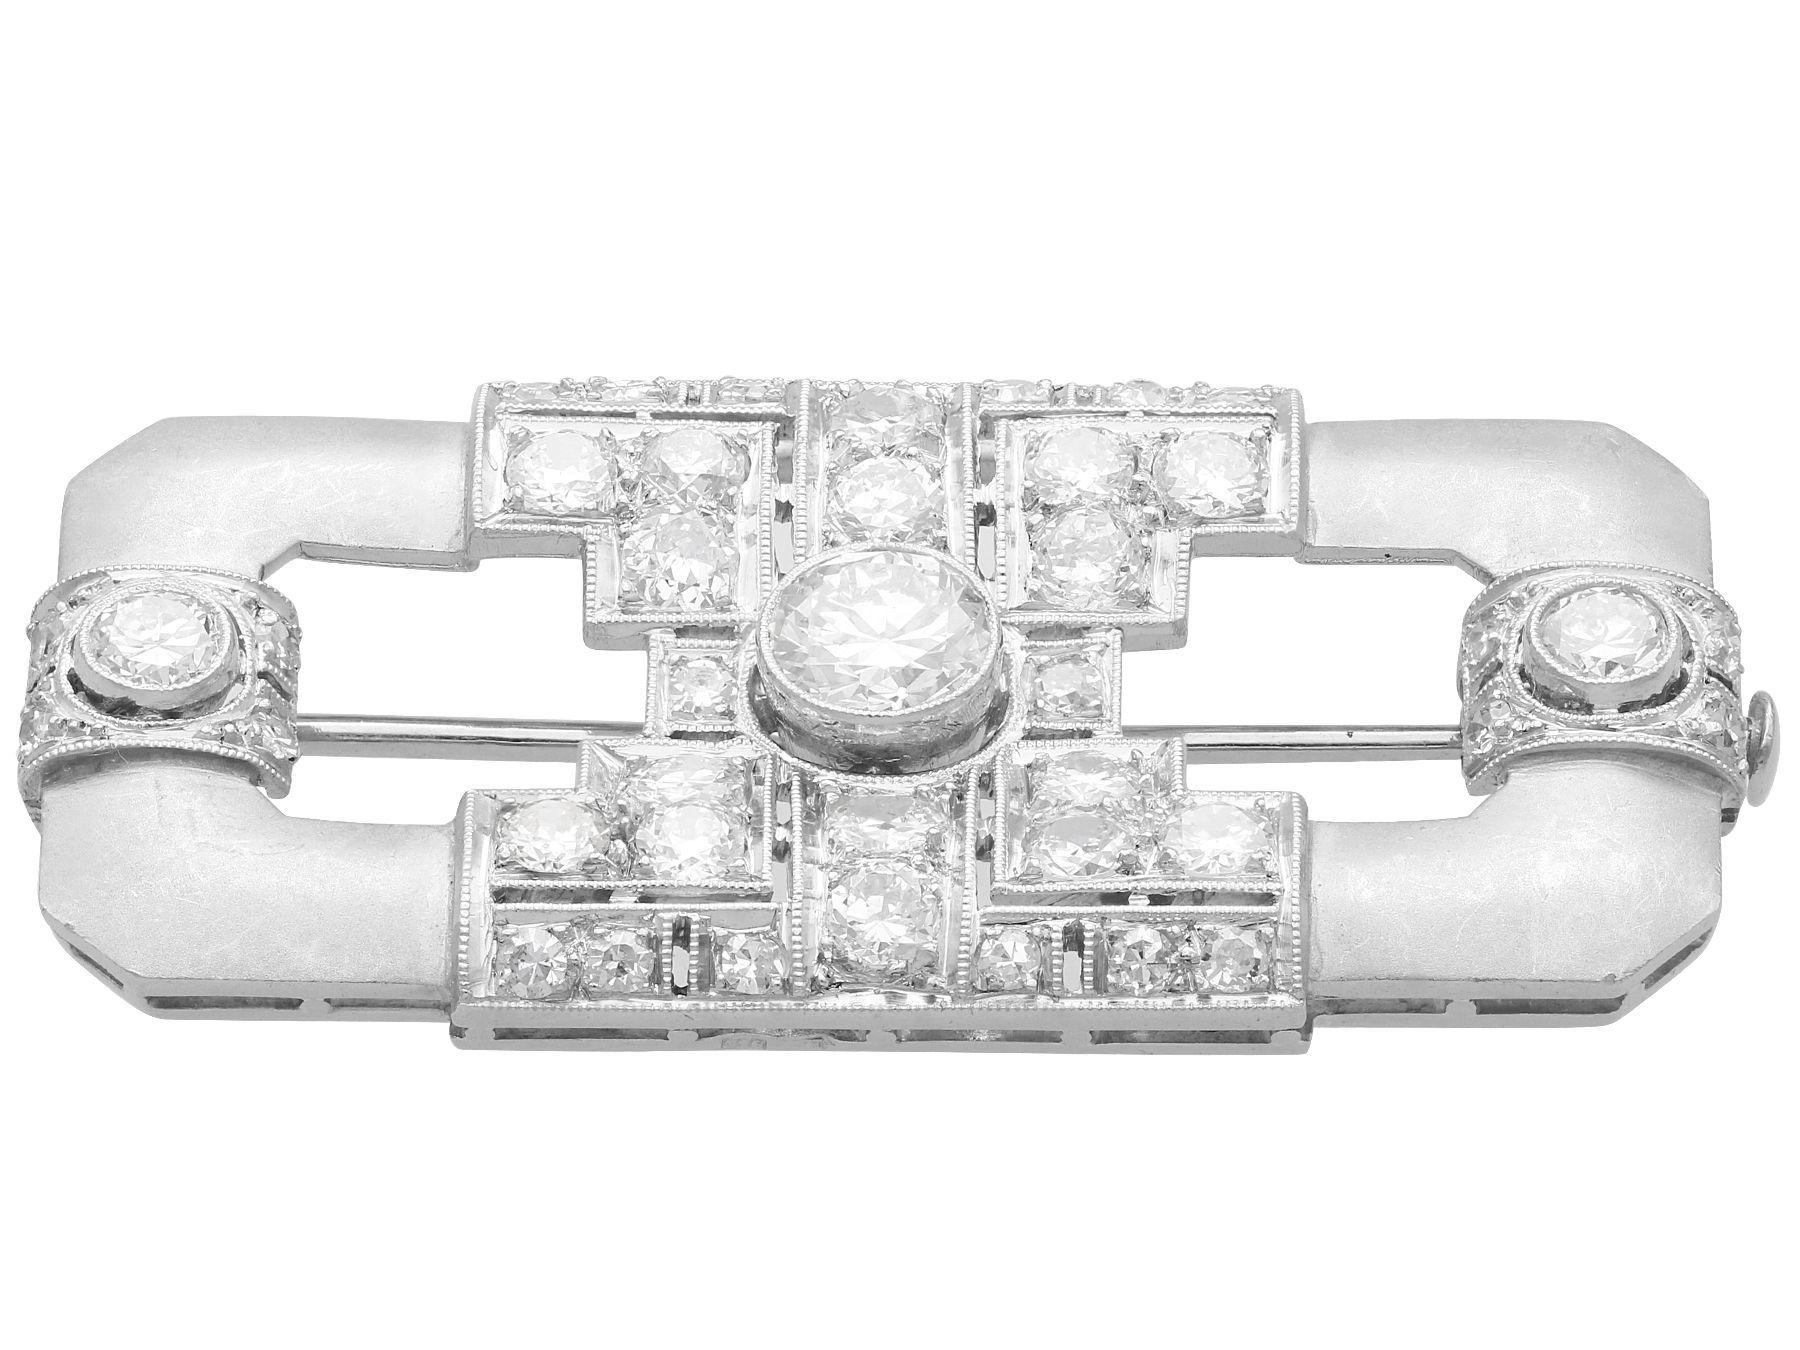 Art Deco 3.50 Carat Diamond and Platinum Brooch In Excellent Condition For Sale In Jesmond, Newcastle Upon Tyne